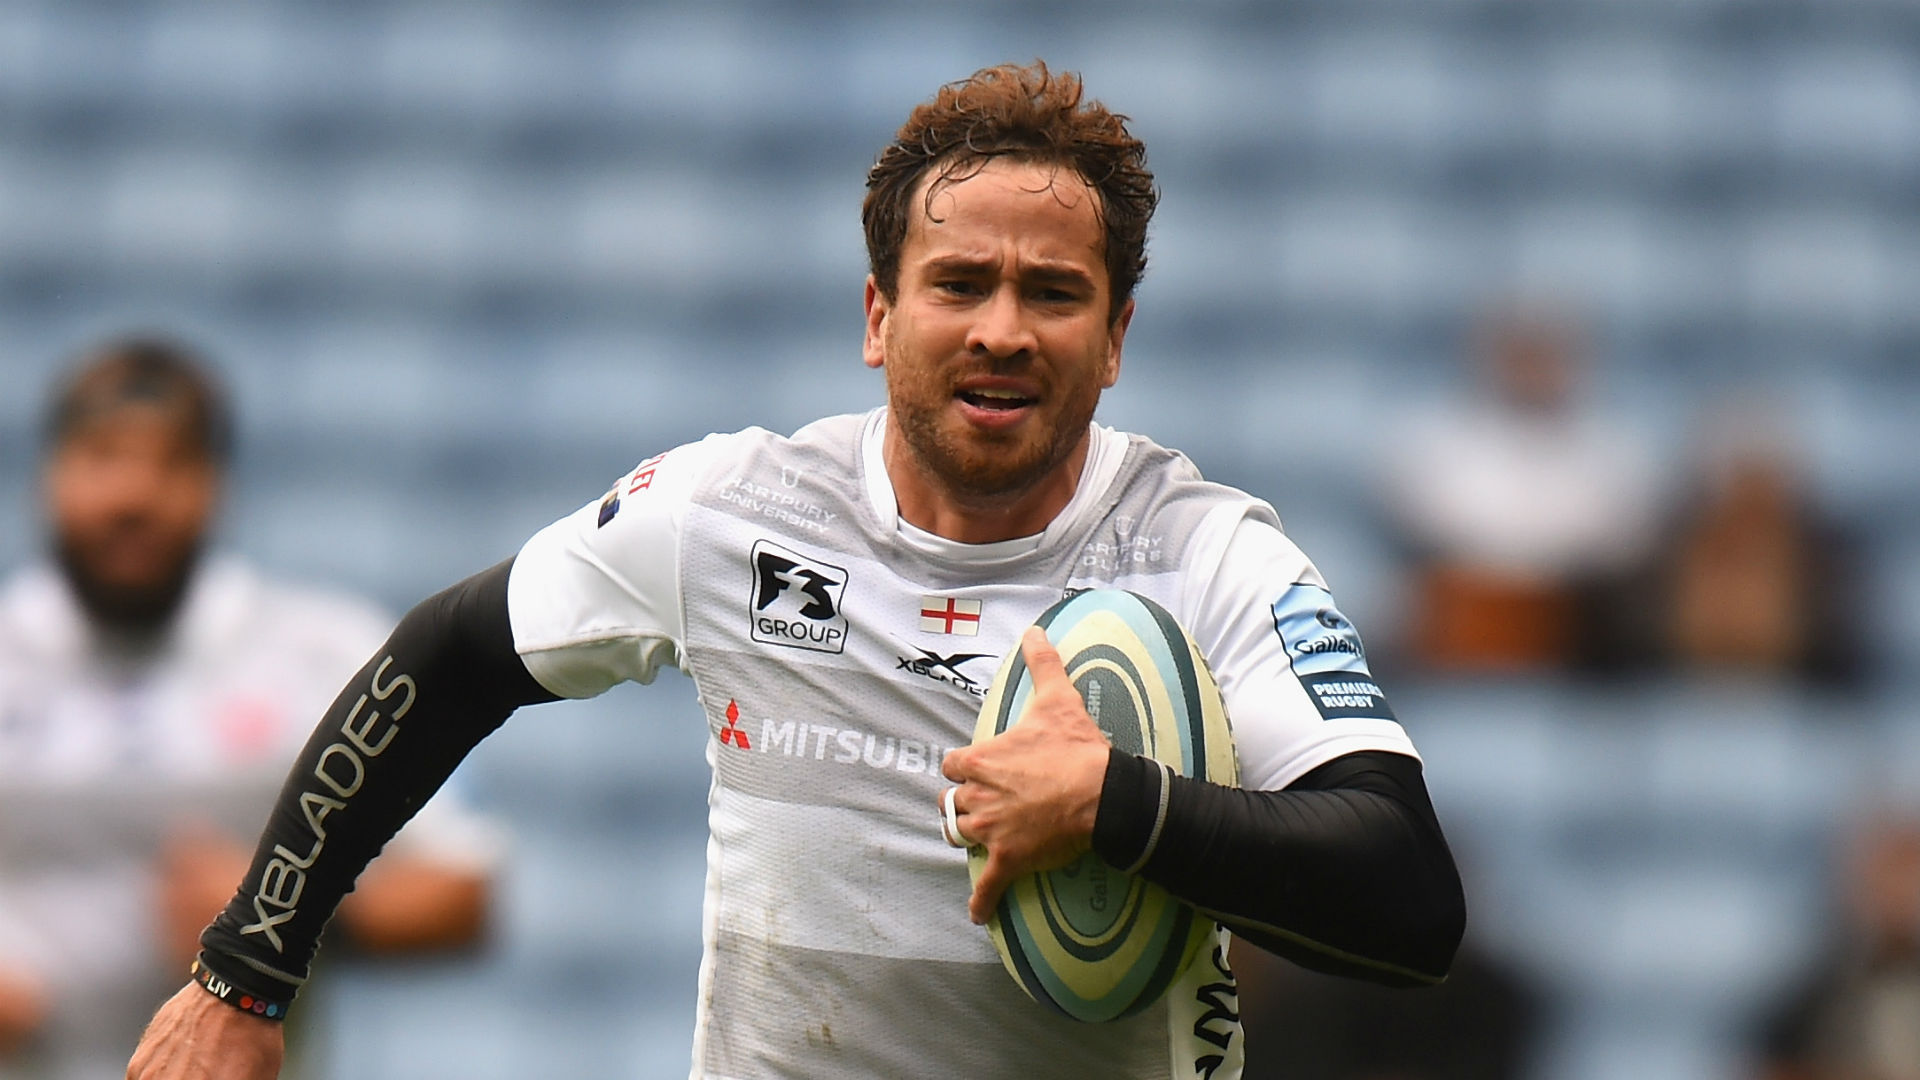 While out of the England picture, Danny Cipriani's Gloucester form has seen him named the Premiership's outstanding player.